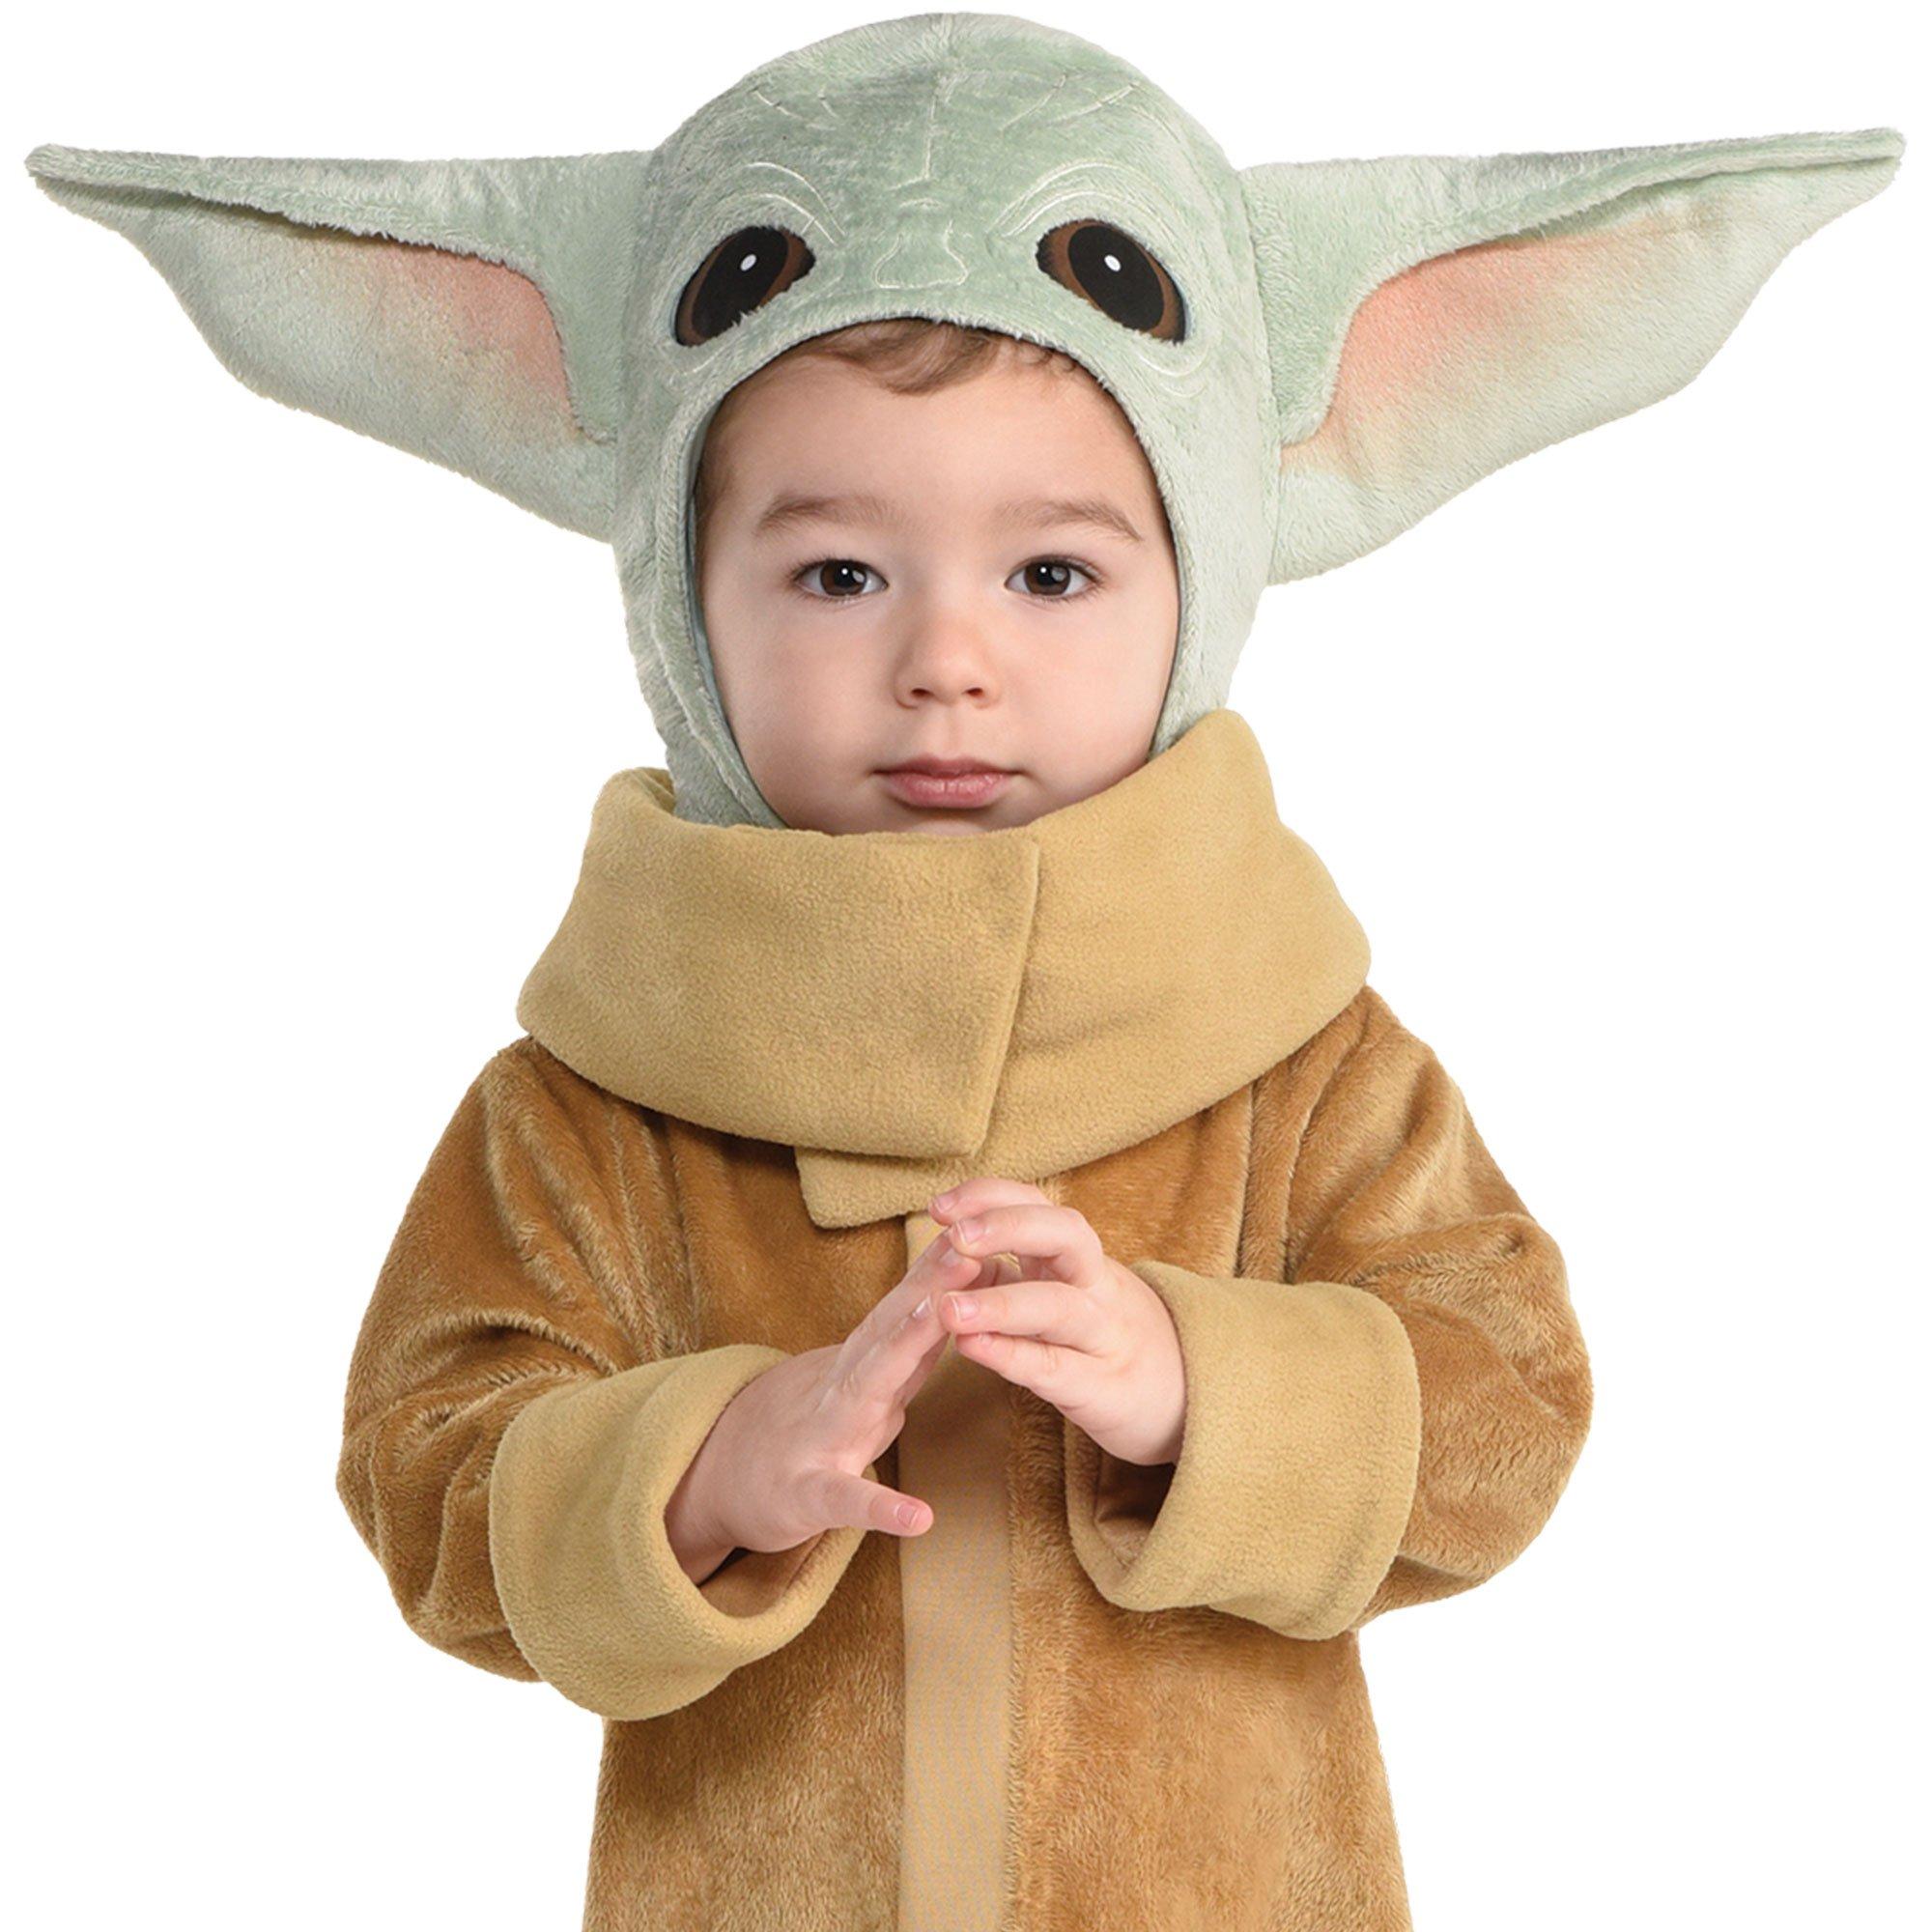 The Mandalorian Baby Yoda Cosplay Costume For Kids Children Outfit